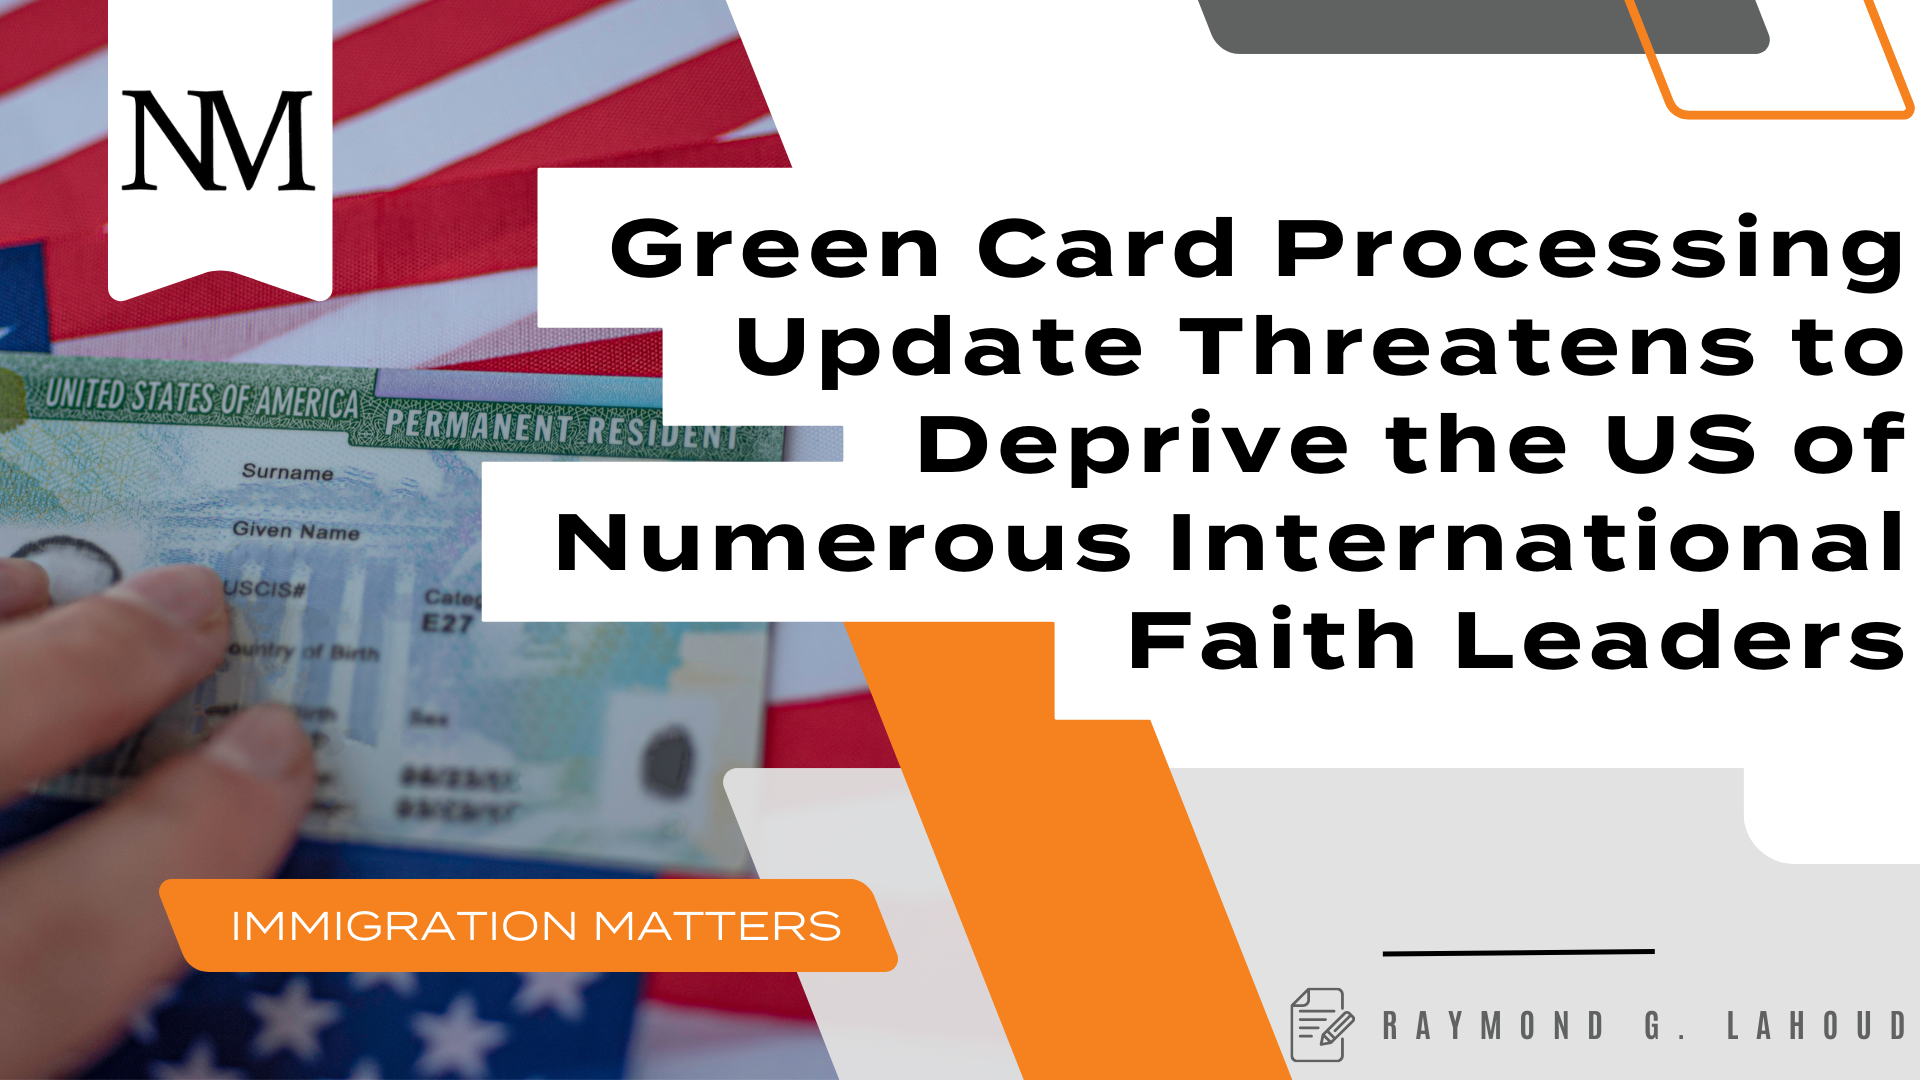 Green Card Processing Update Threatens to Deprive the US of Numerous International Faith Leaders